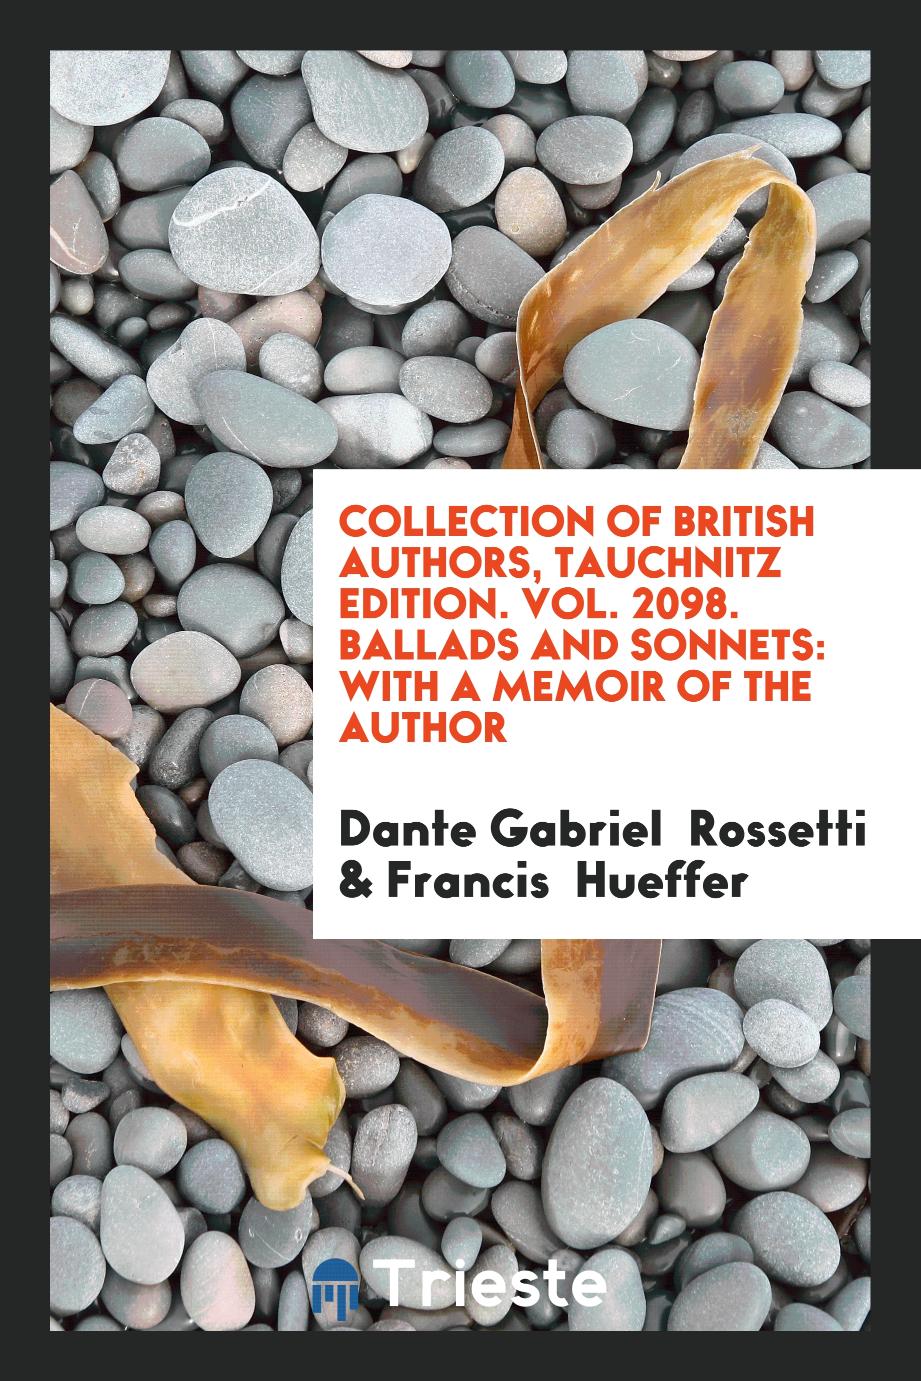 Collection of British Authors, Tauchnitz Edition. Vol. 2098. Ballads and Sonnets: With a Memoir of the Author